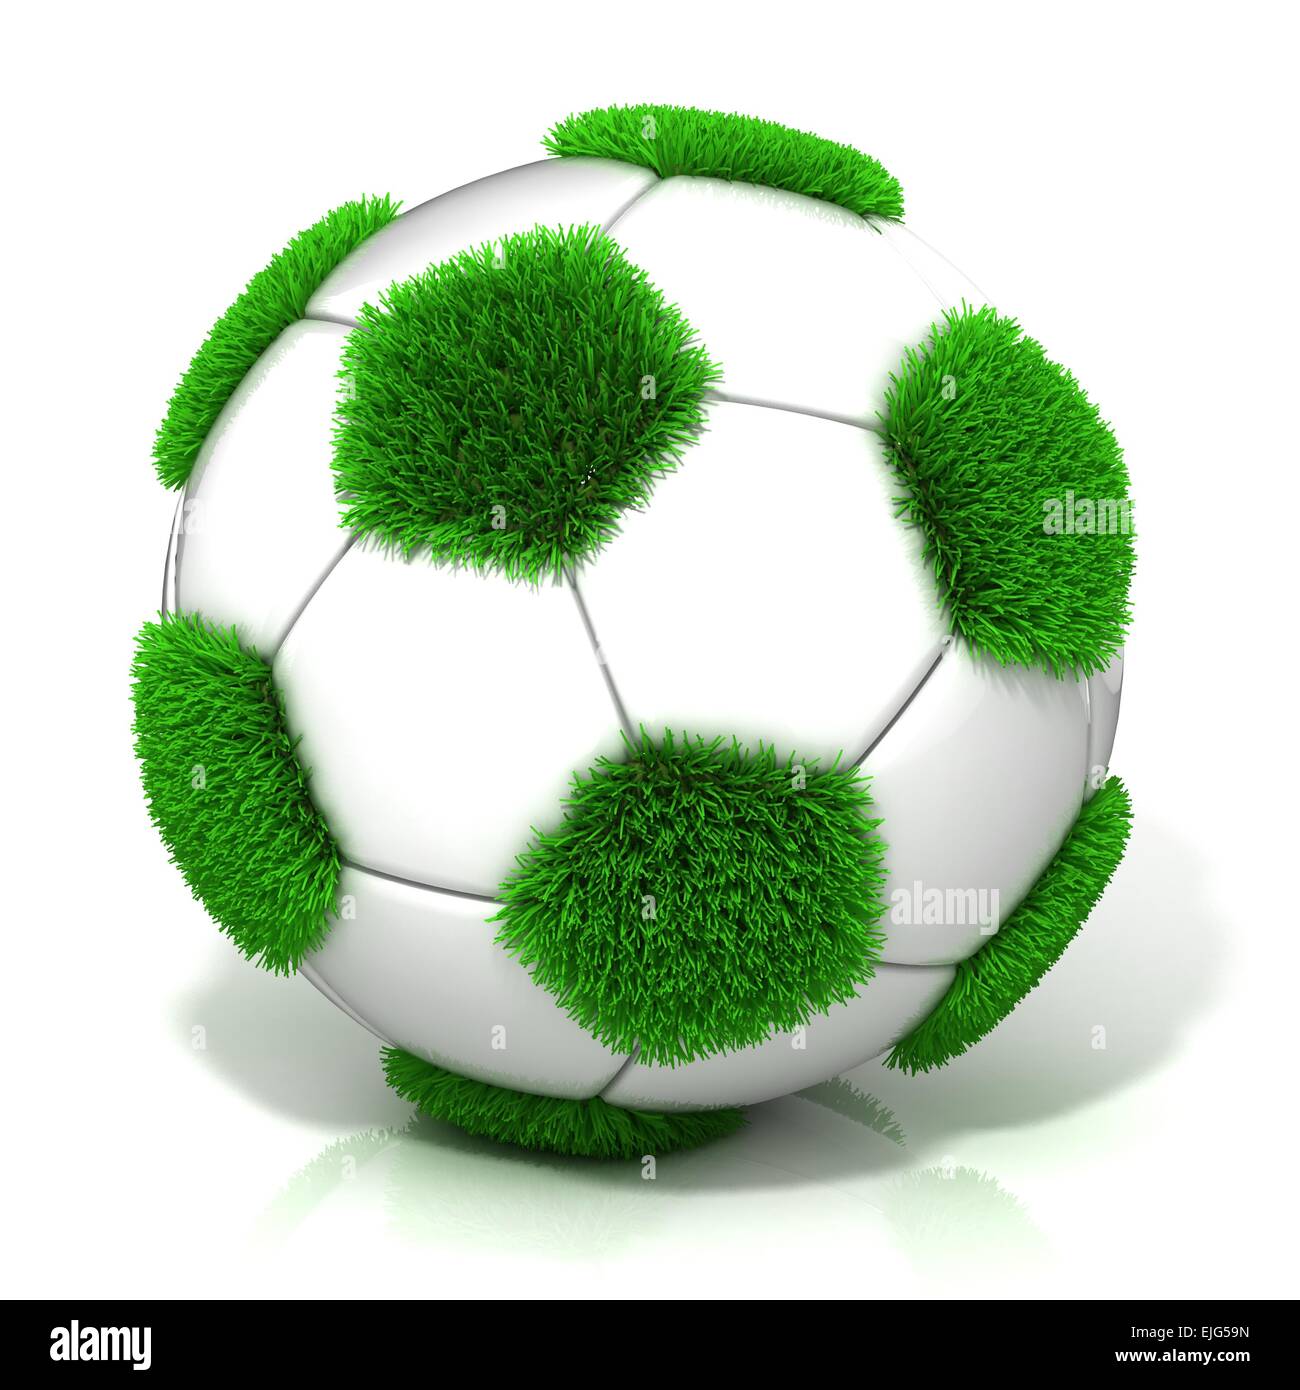 Football ball with grassy field instead black, isolated on white Stock Photo